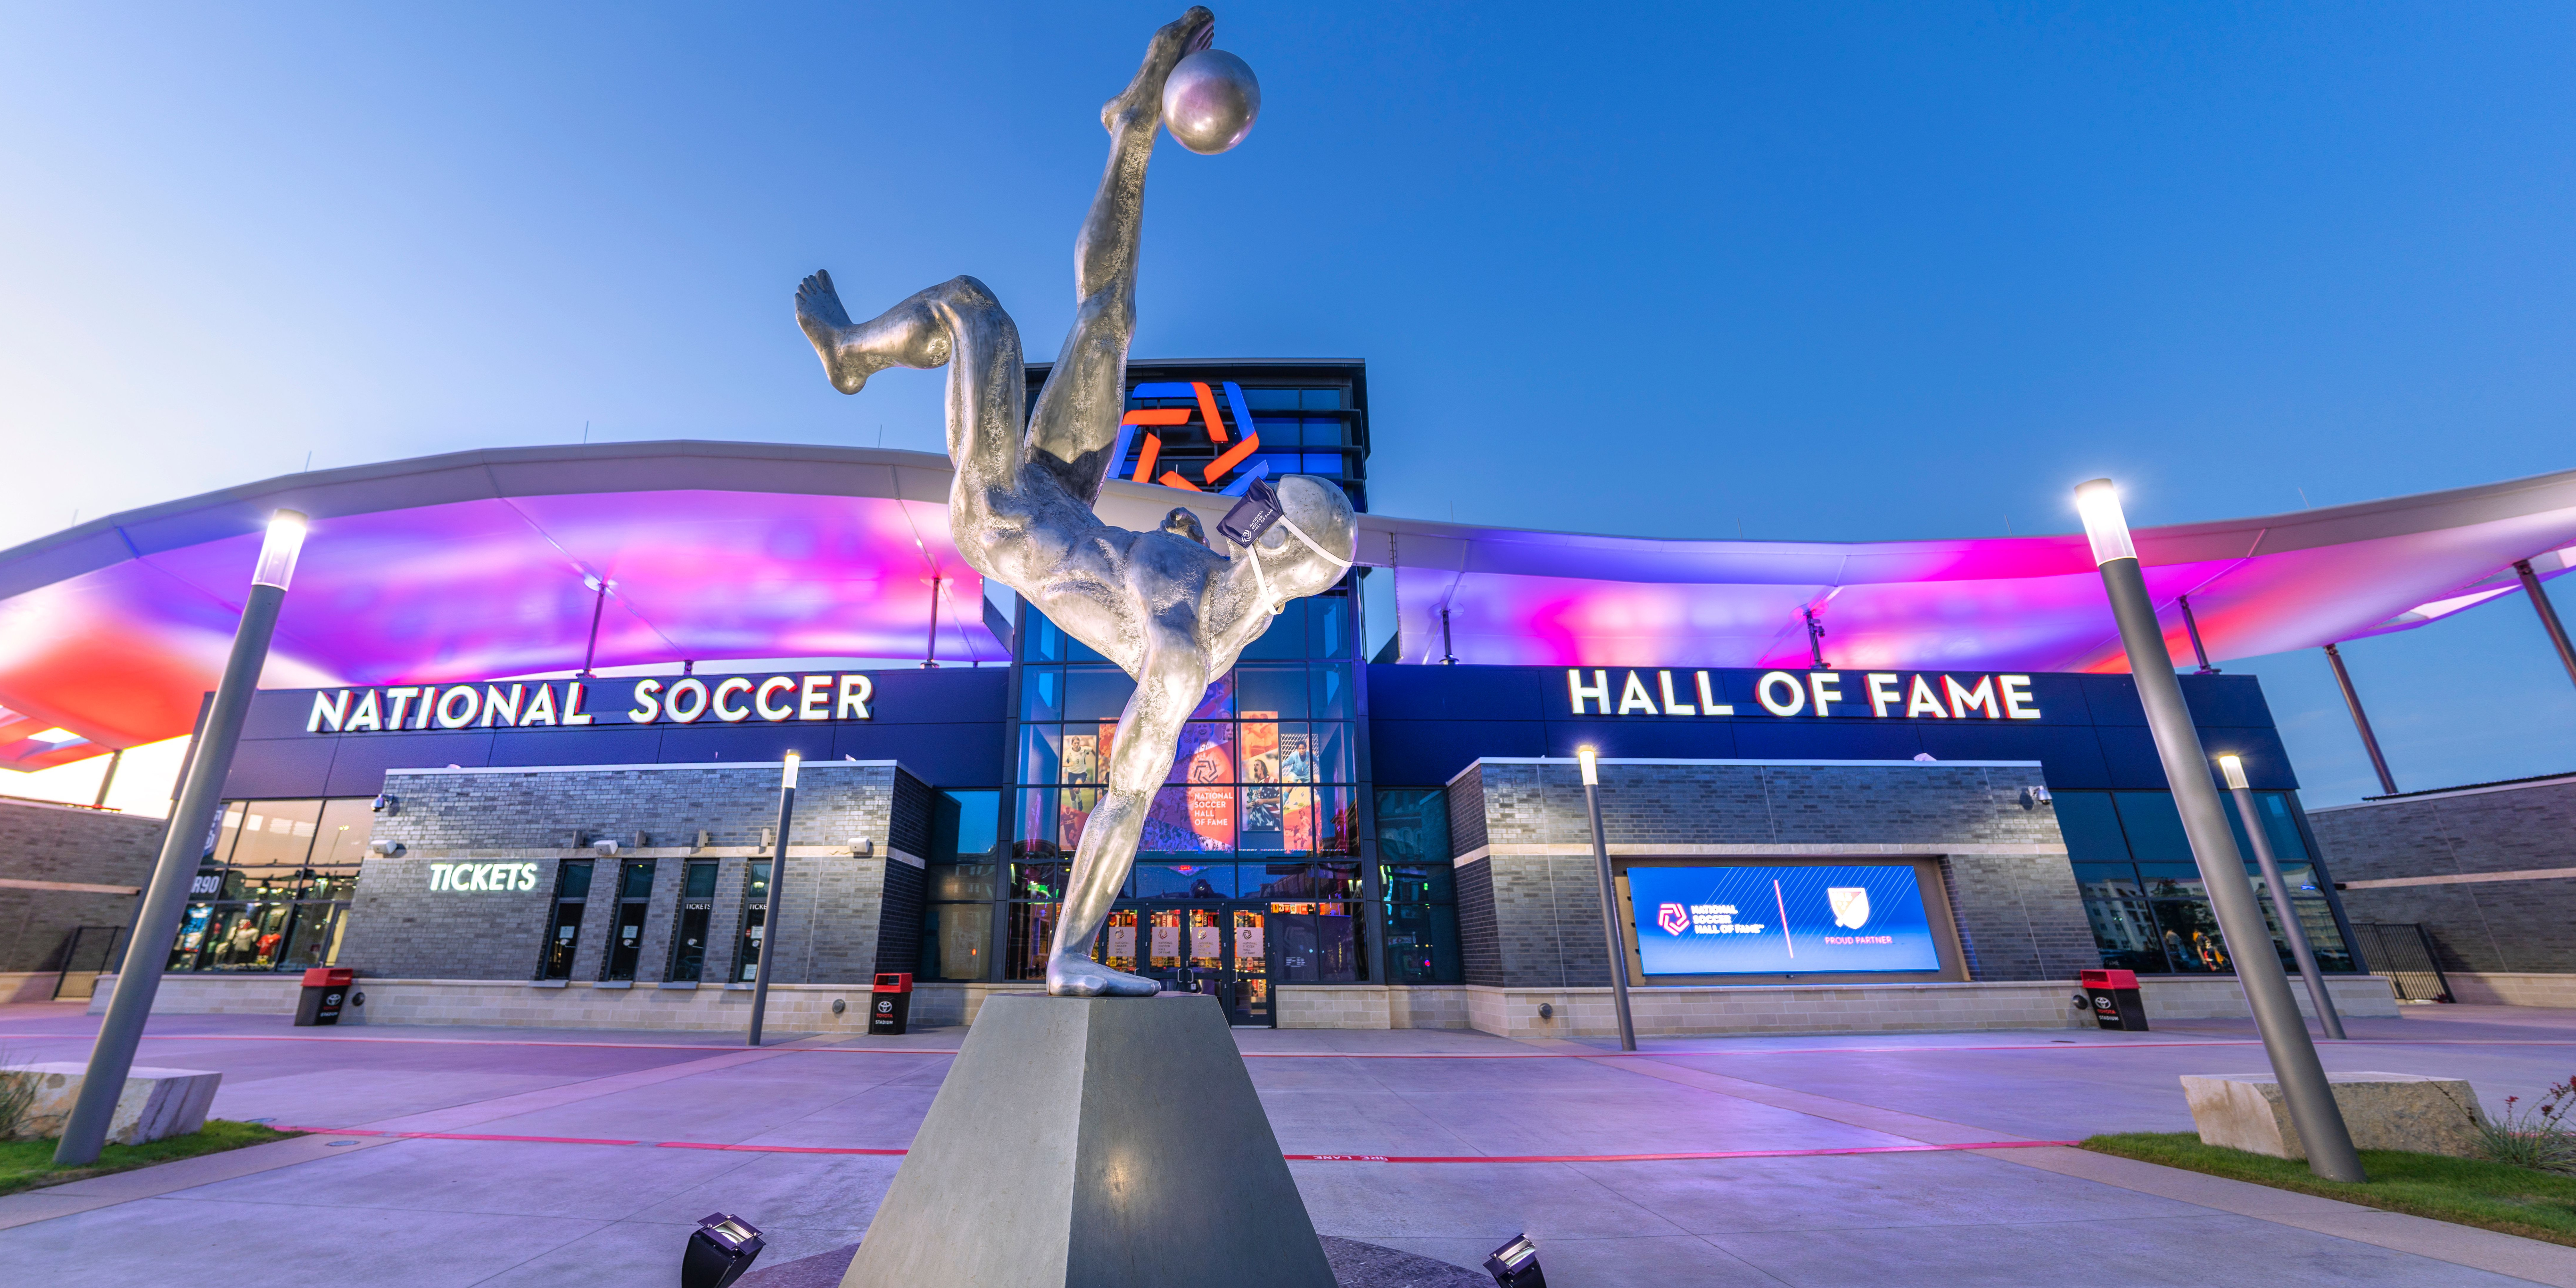 A statue kicking a soccer ball at the front of the National Soccer Hall of Fame. The building is lit up with red and blue lights.